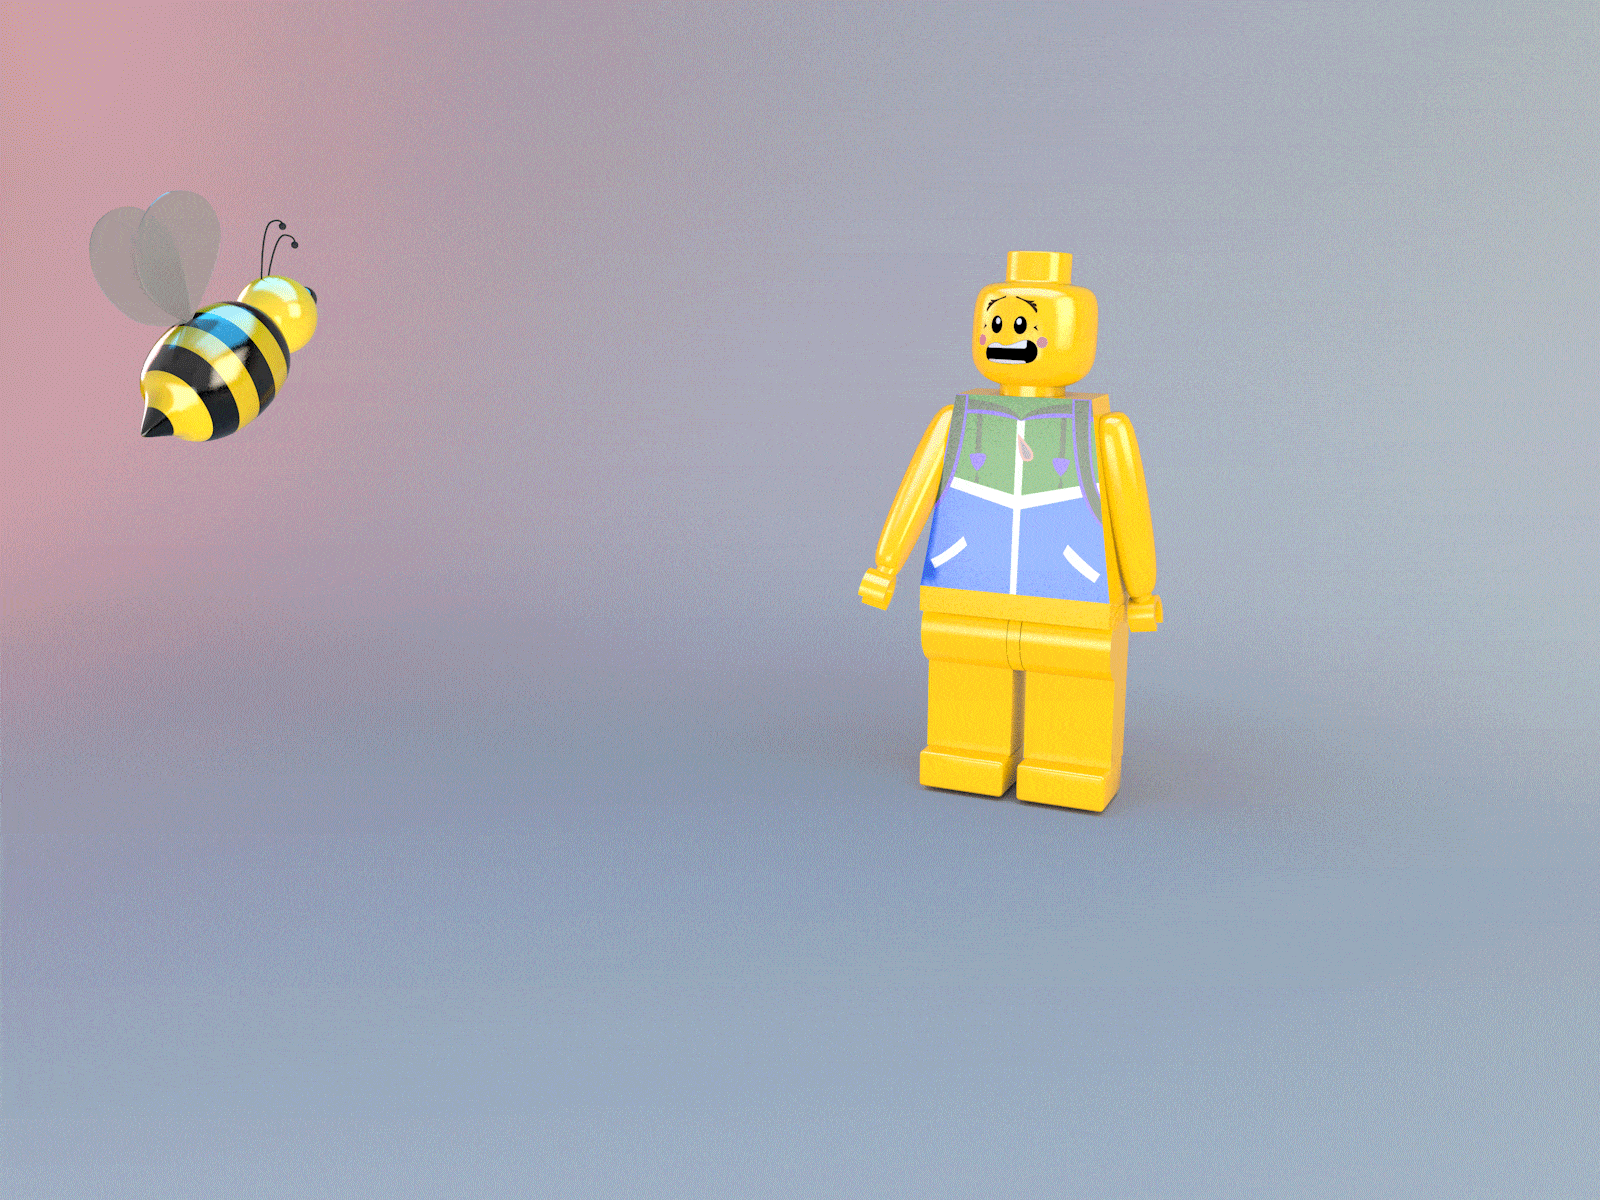 Lego and bee animation 3d 3d model 3d modelling animated gif animation design c4d